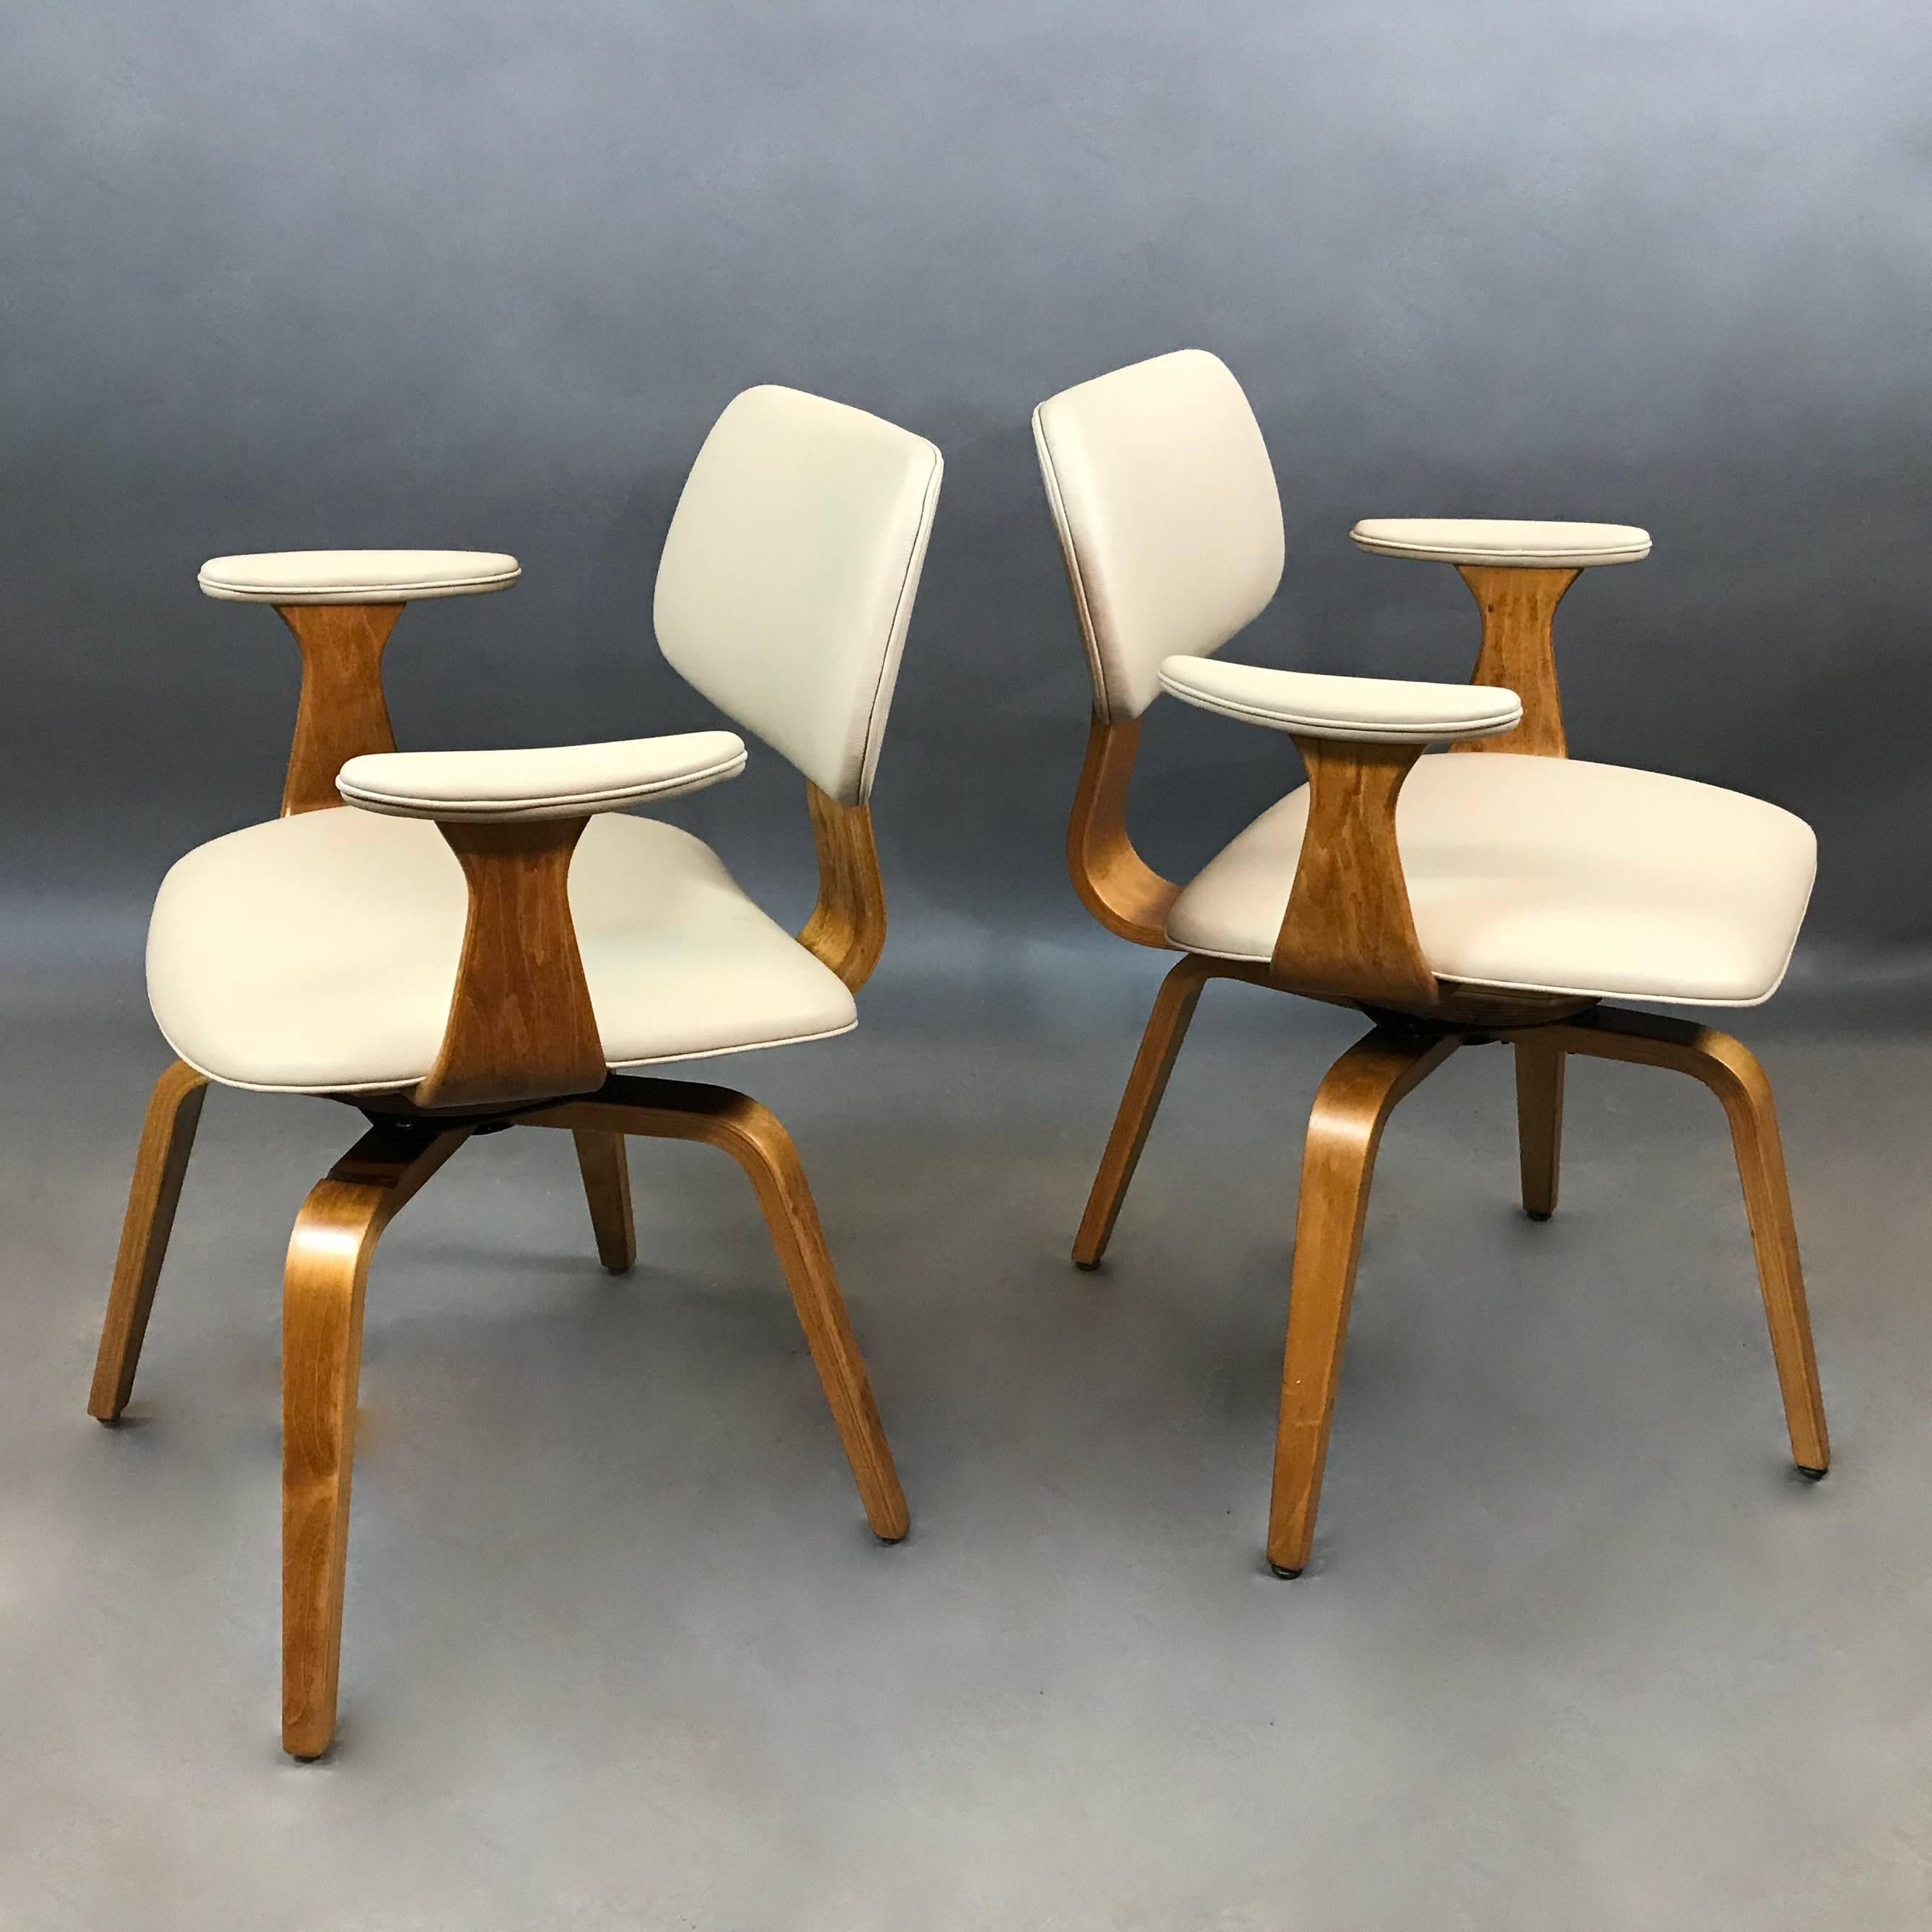 Pair of Mid-Century Modern, bent maple, swivel armchairs by Thonet with newly upholstered seats, backs and armrests in cream leather. Measure: The arm height is 26 inches.